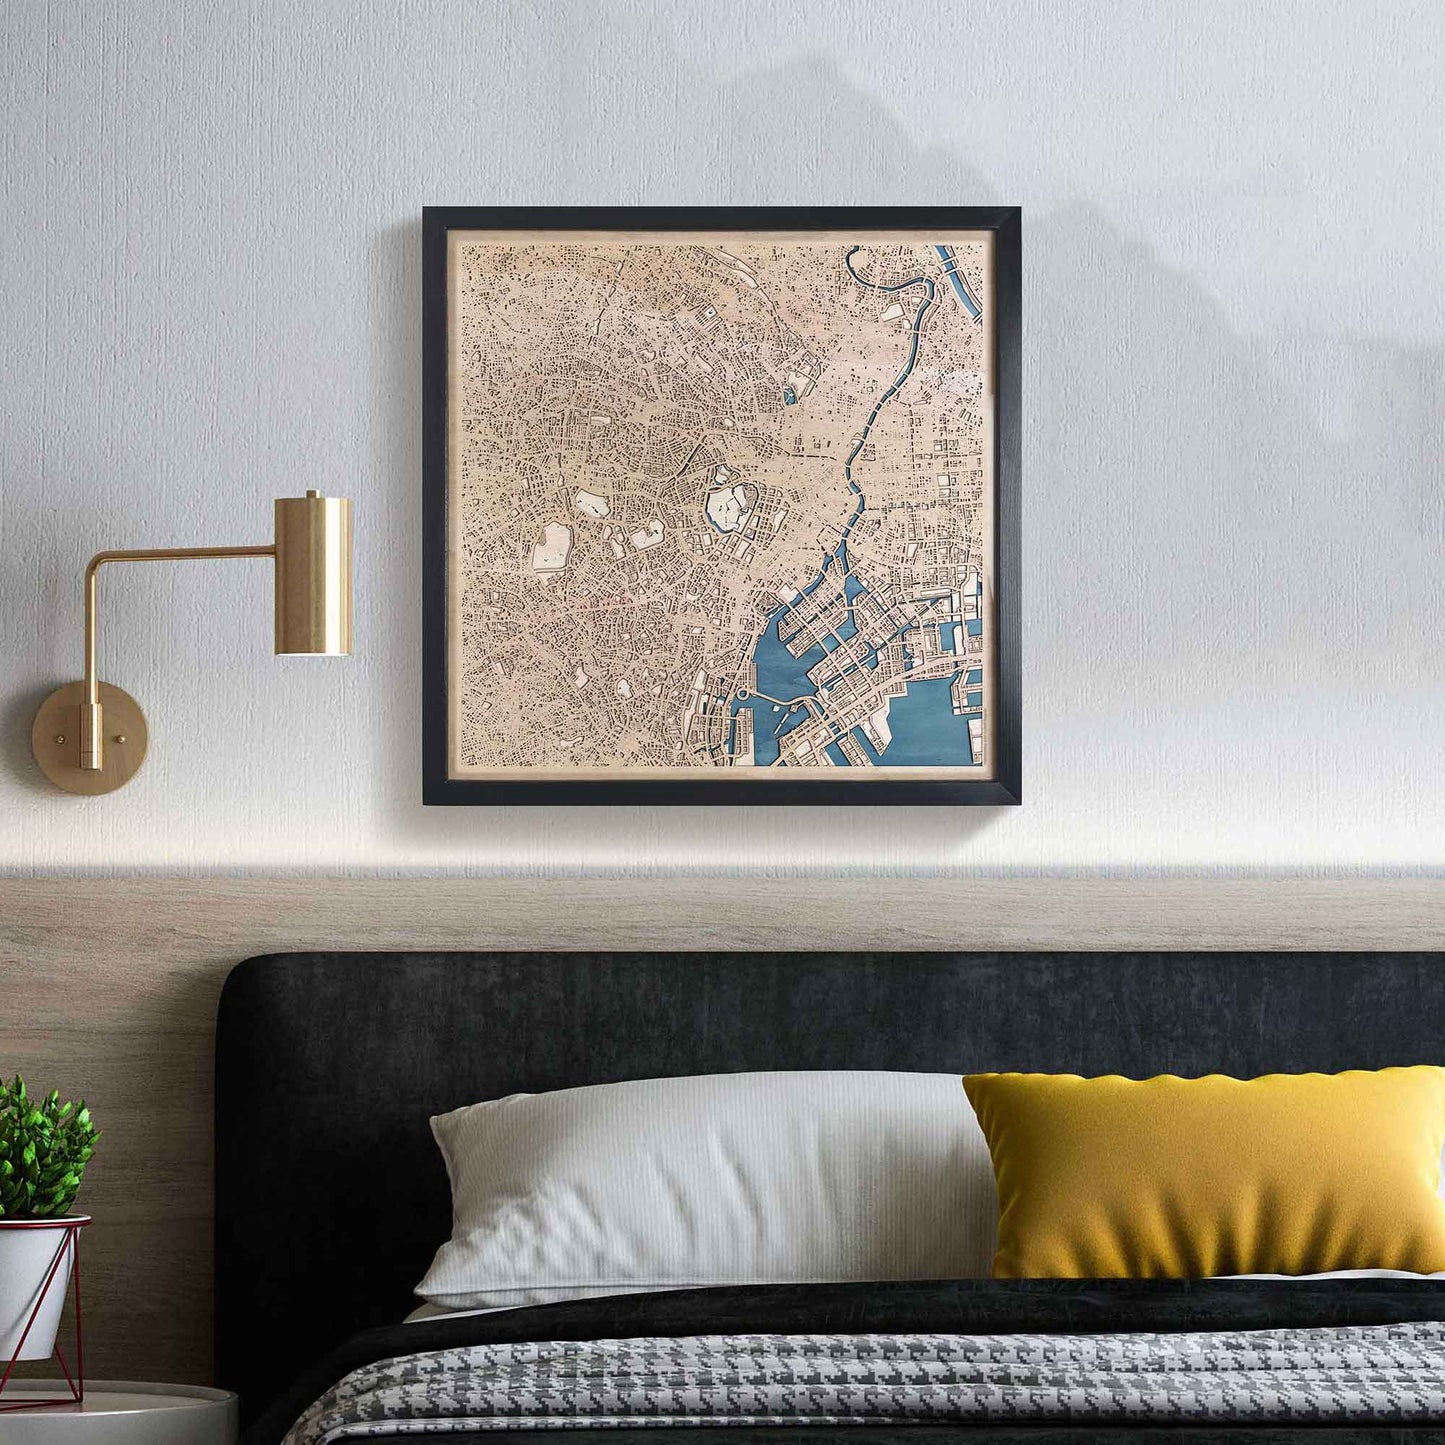 Tokyo Wooden Map by CityWood - Custom Wood Map Art - Unique Laser Cut Engraved - Anniversary Gift